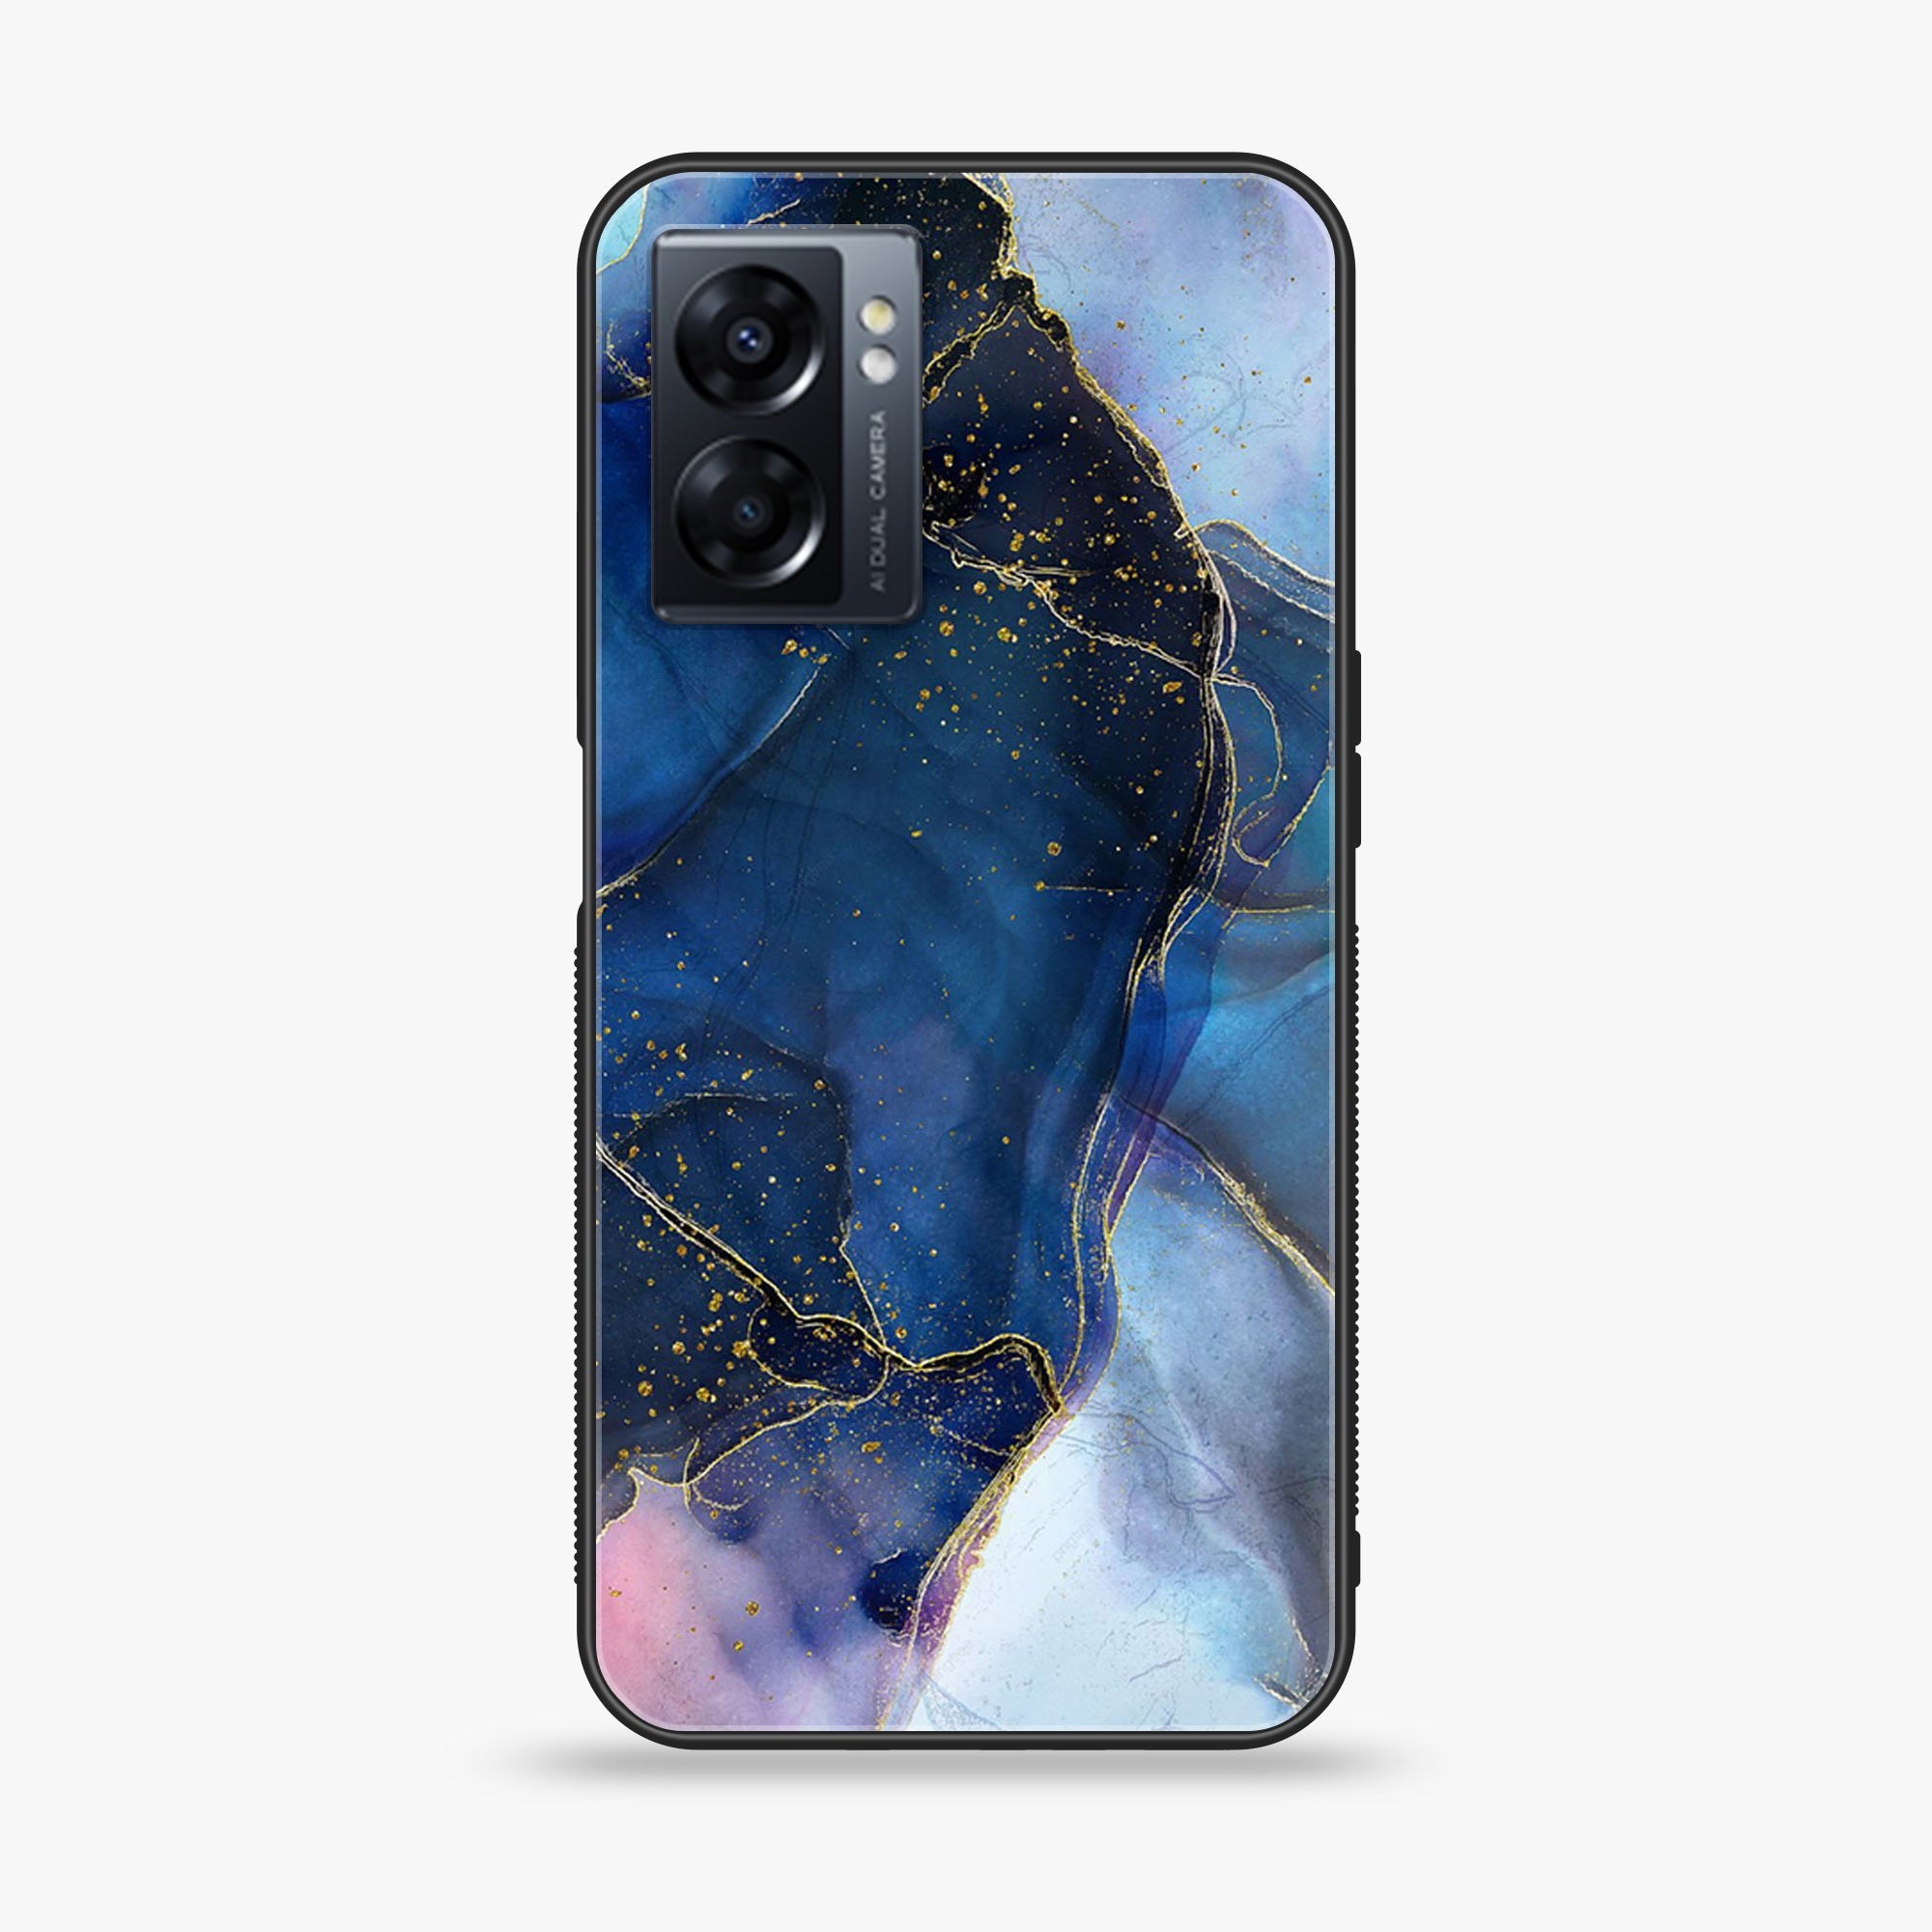 Oppo A77s - Blue Marble Series - Premium Printed Glass soft Bumper shock Proof Case